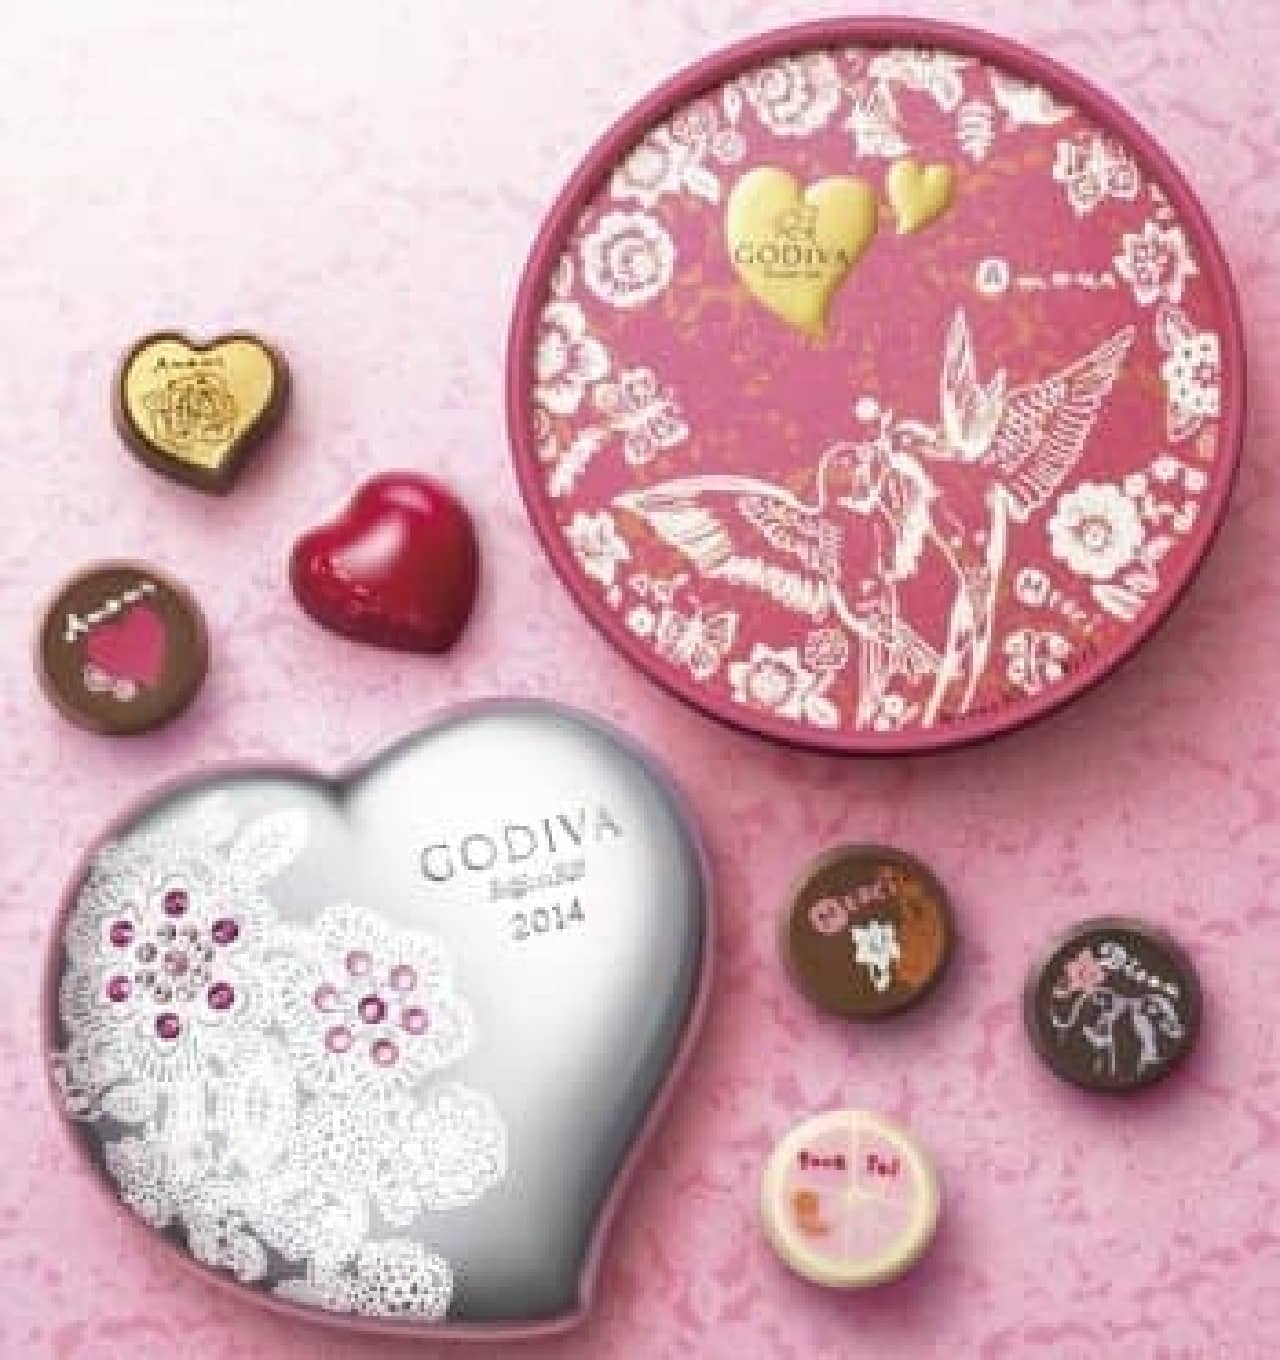 Appeared this year too! Godiva's Valentine's Chocolate--It's a sweet